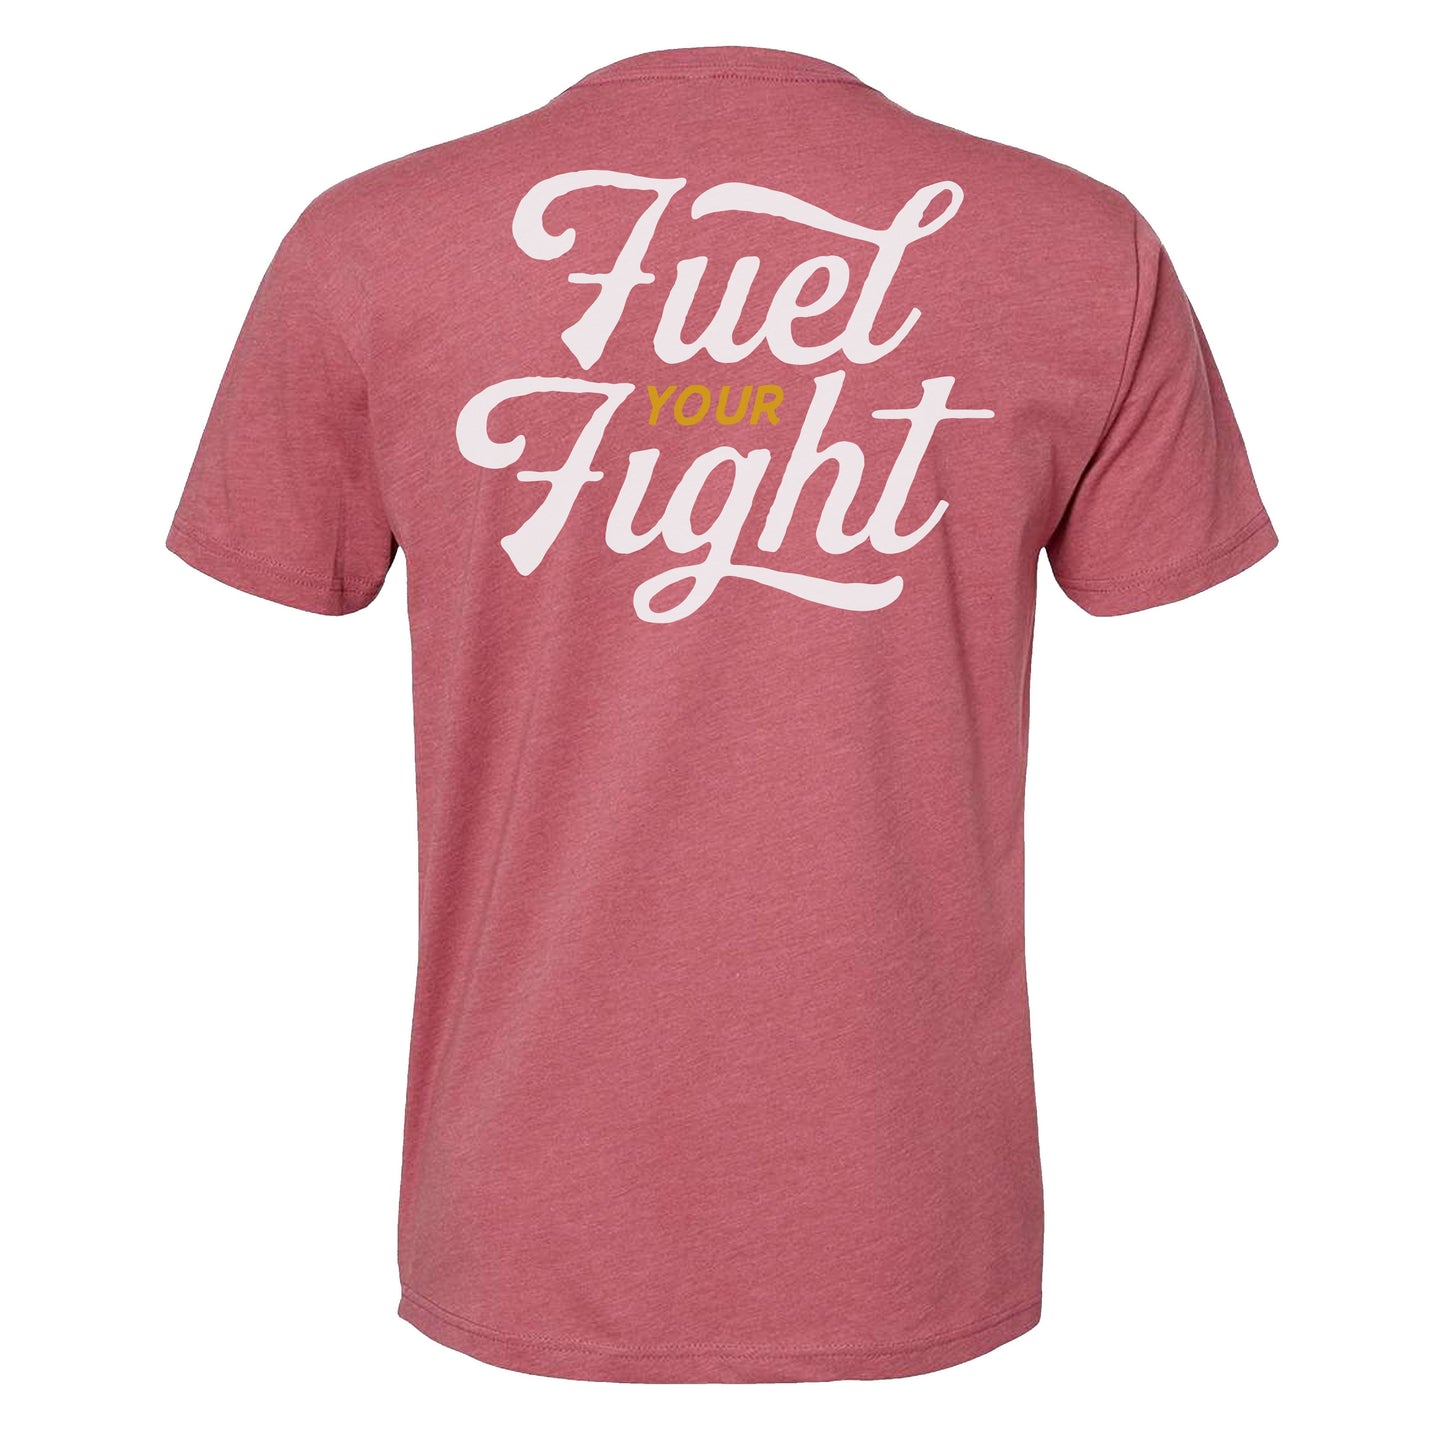 Fuel Your Fight Tee